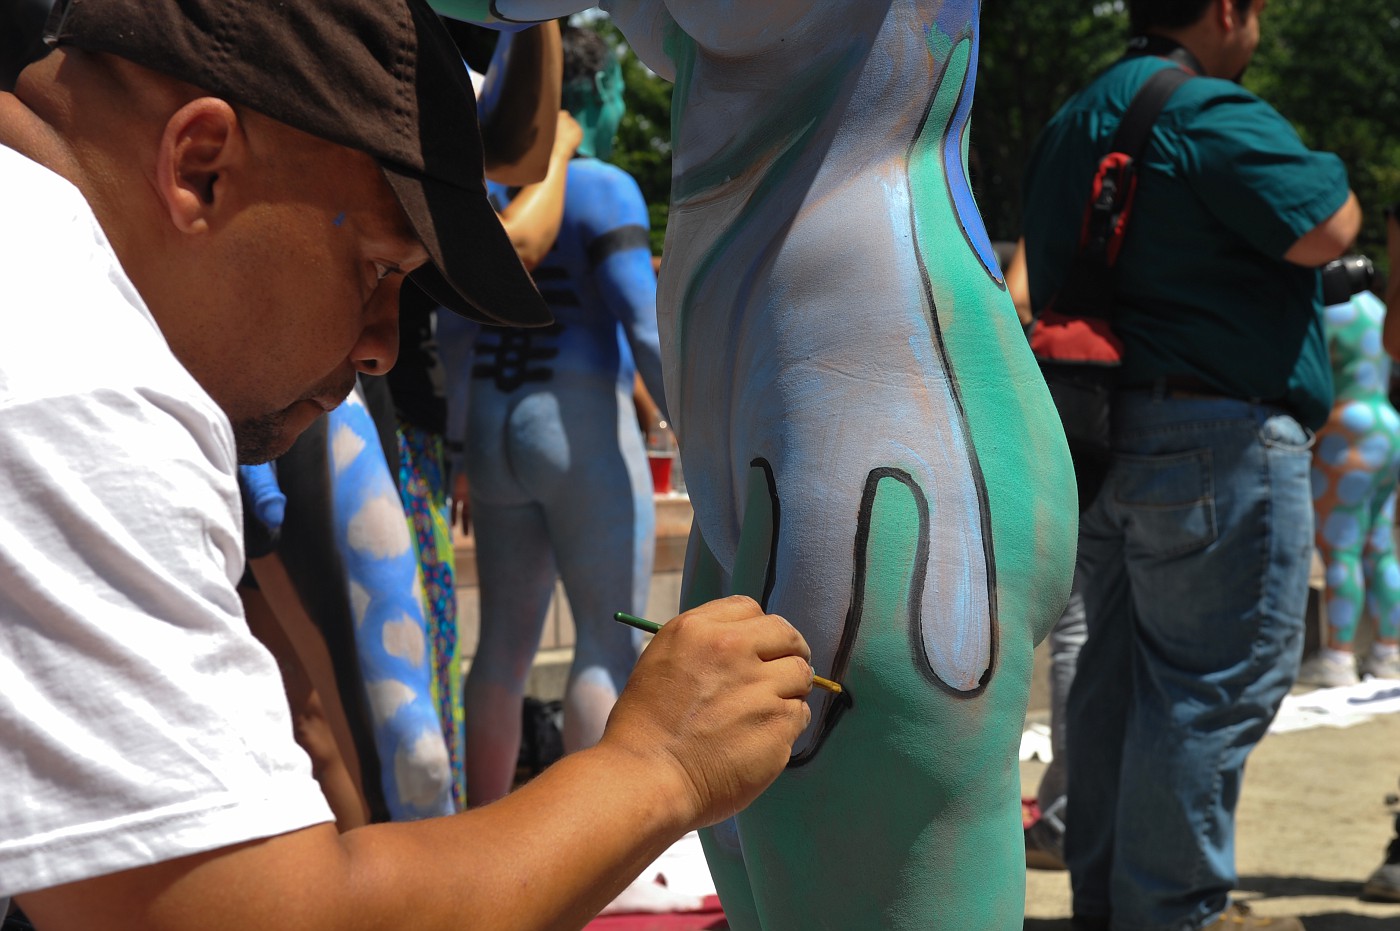 artists take to New York City streets during first official Body Painting E...